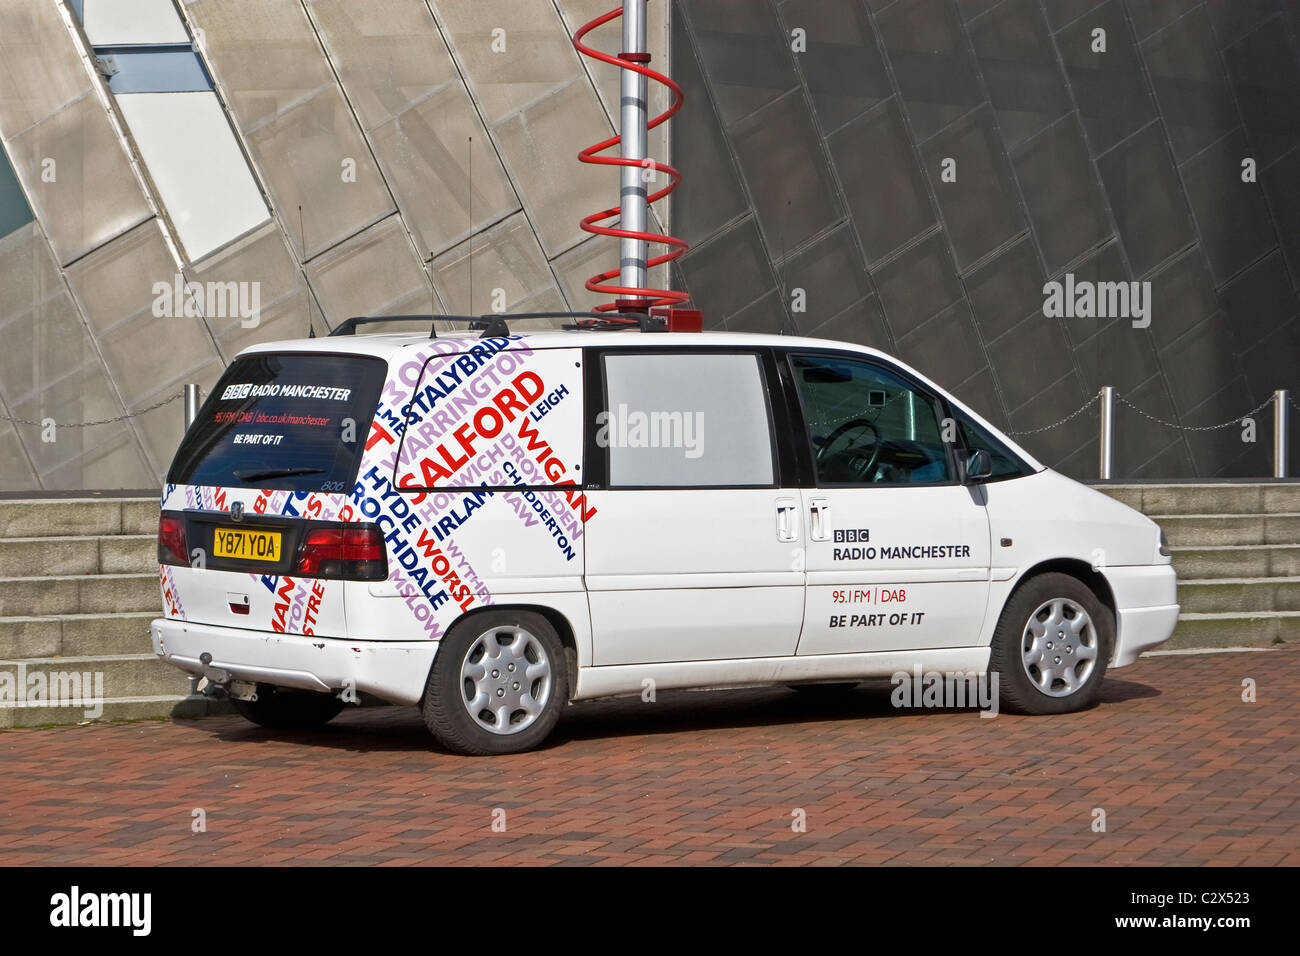 BBC Radio Manchester outside broadcast van at The Lowry arts centre,  Salford Quays, Salford, Greater Manchester, England, UK Stock Photo - Alamy